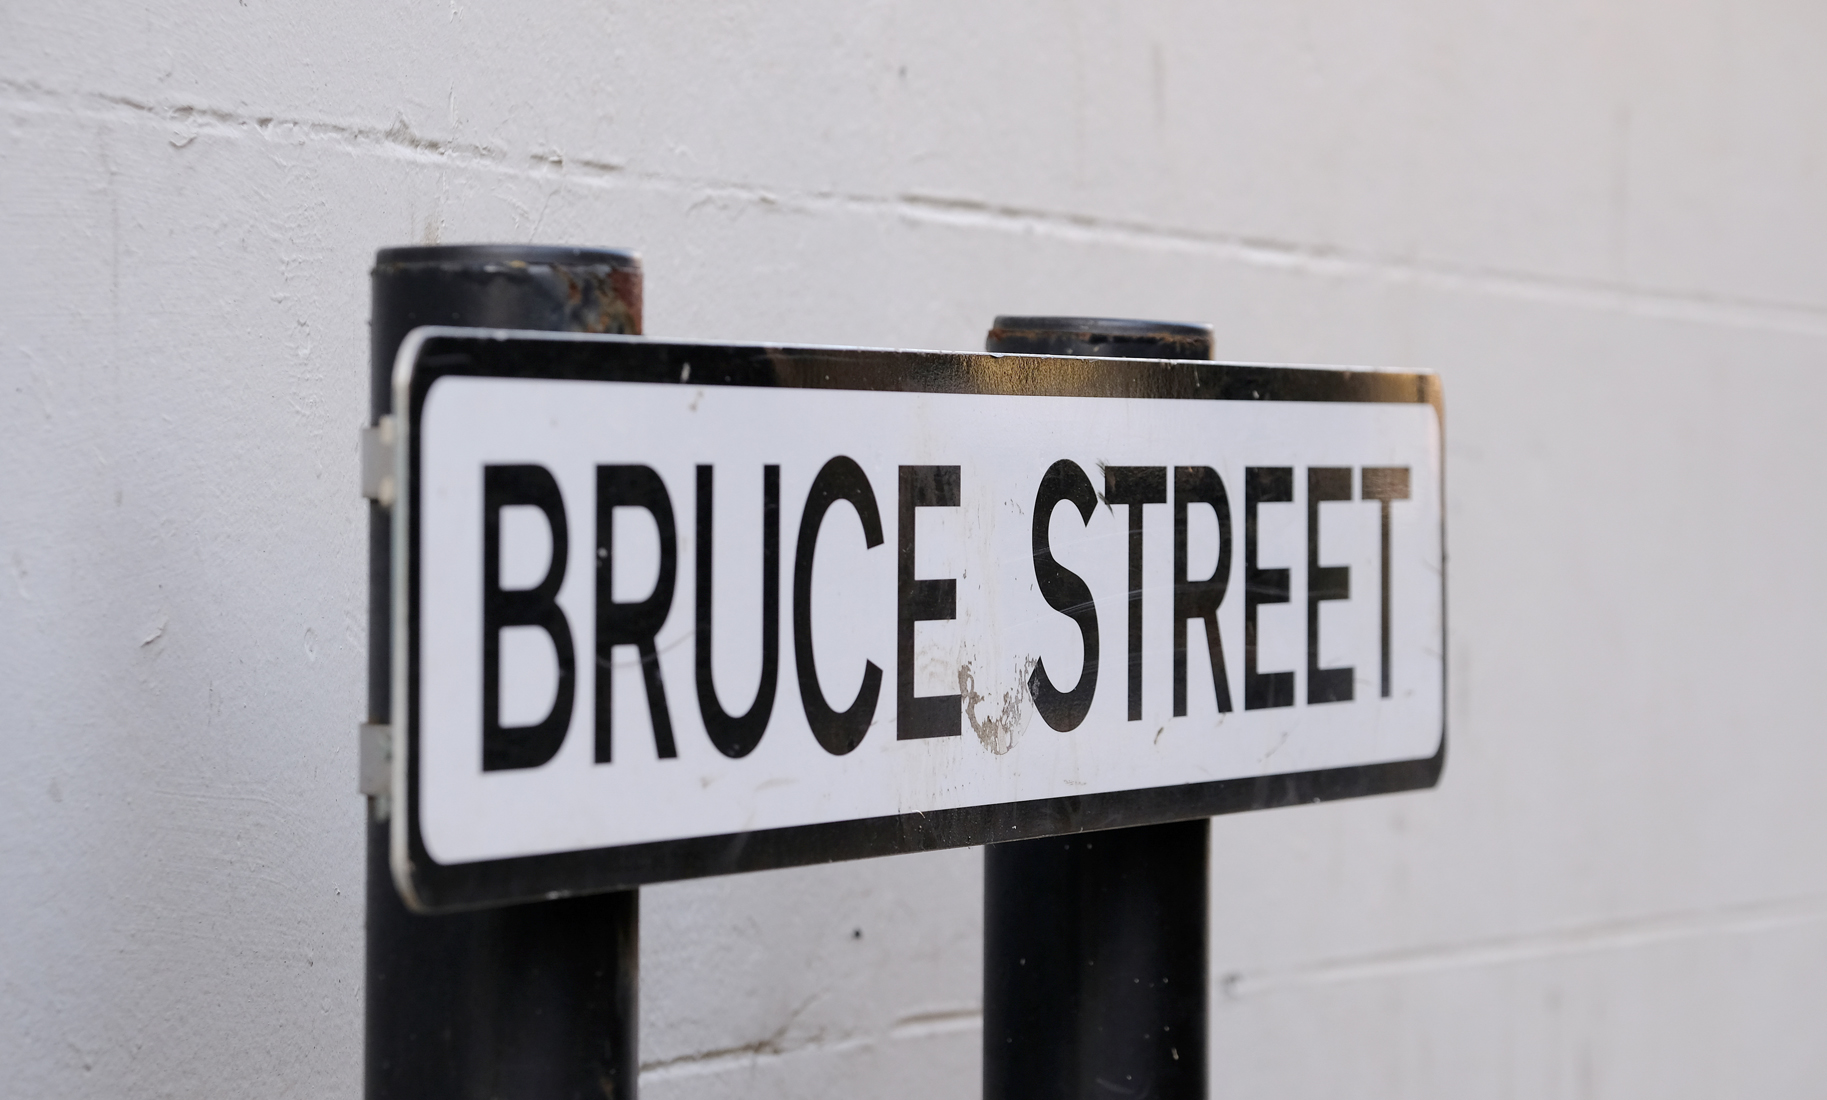 Street sign white background, black writing with Bruce Street.